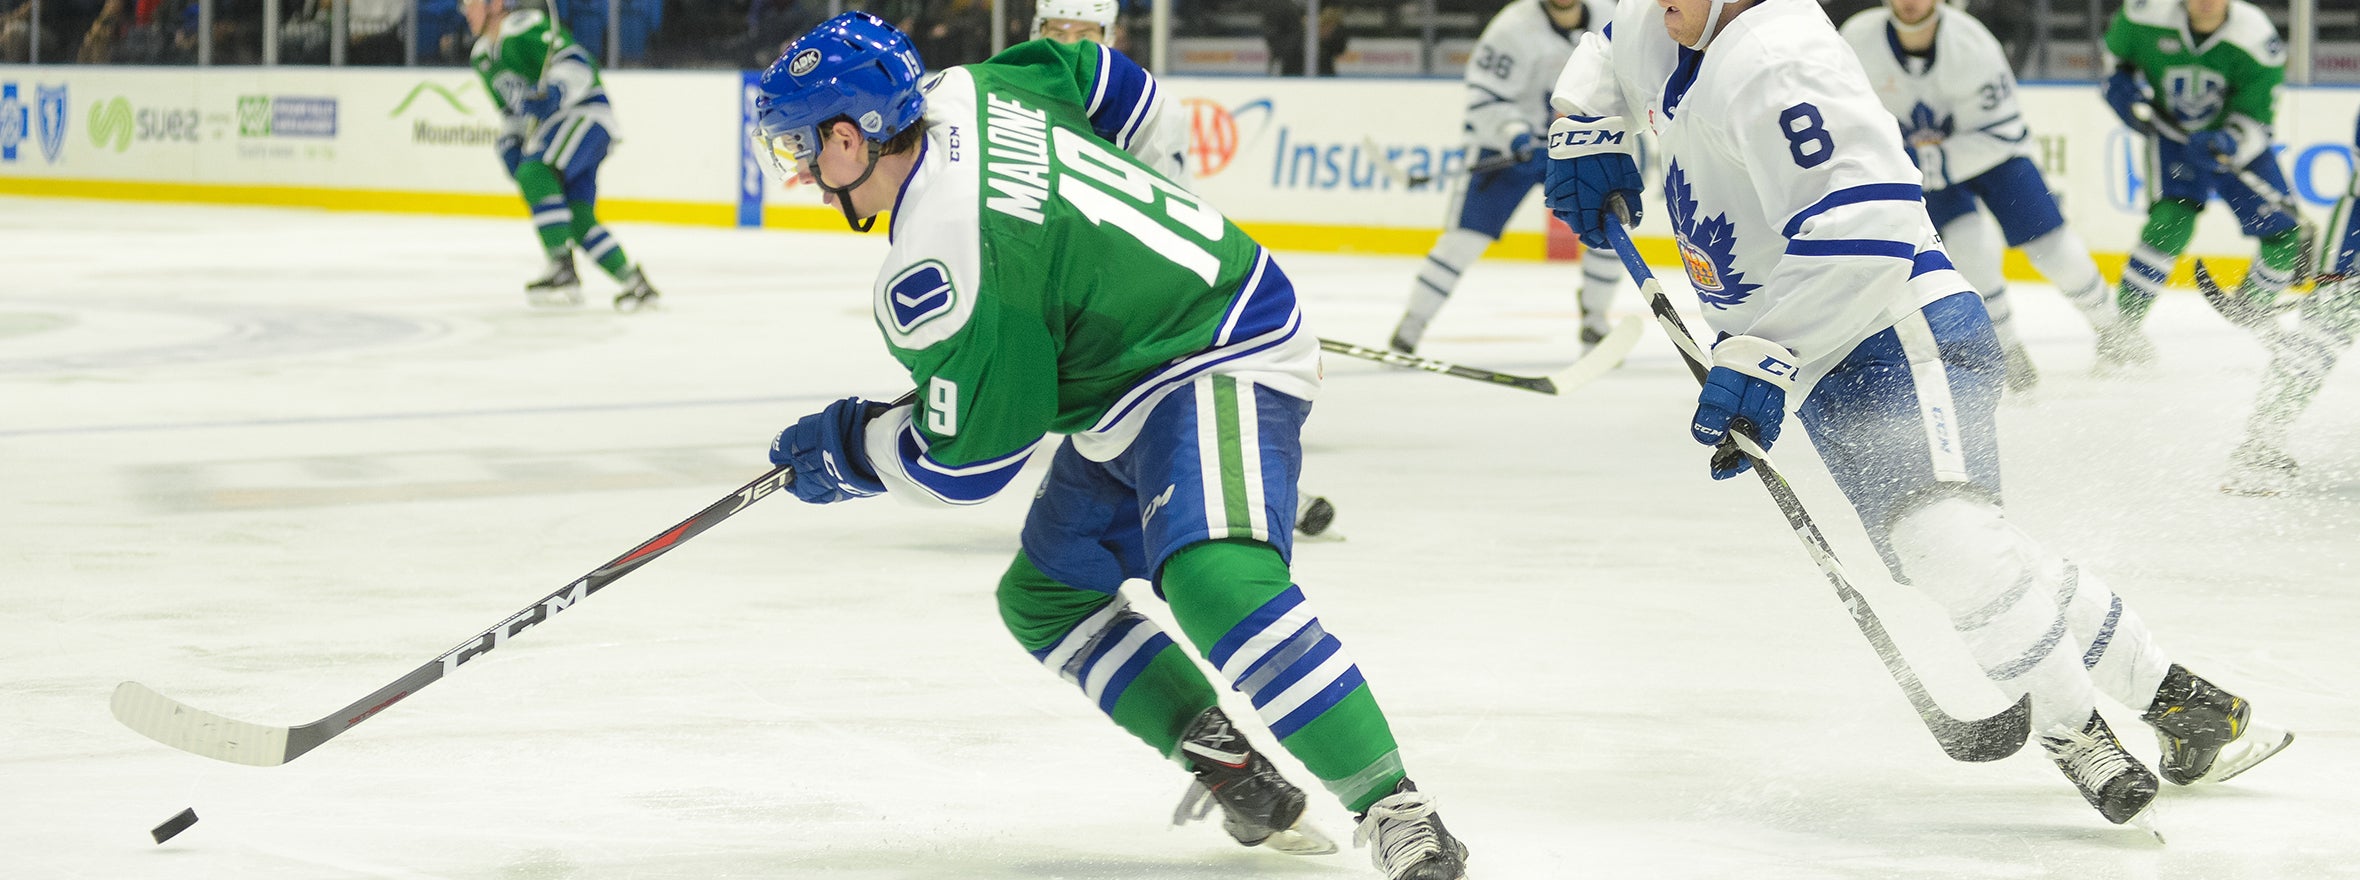 FOUR GOAL THIRD PERIOD DOOMS COMETS IN LOSS